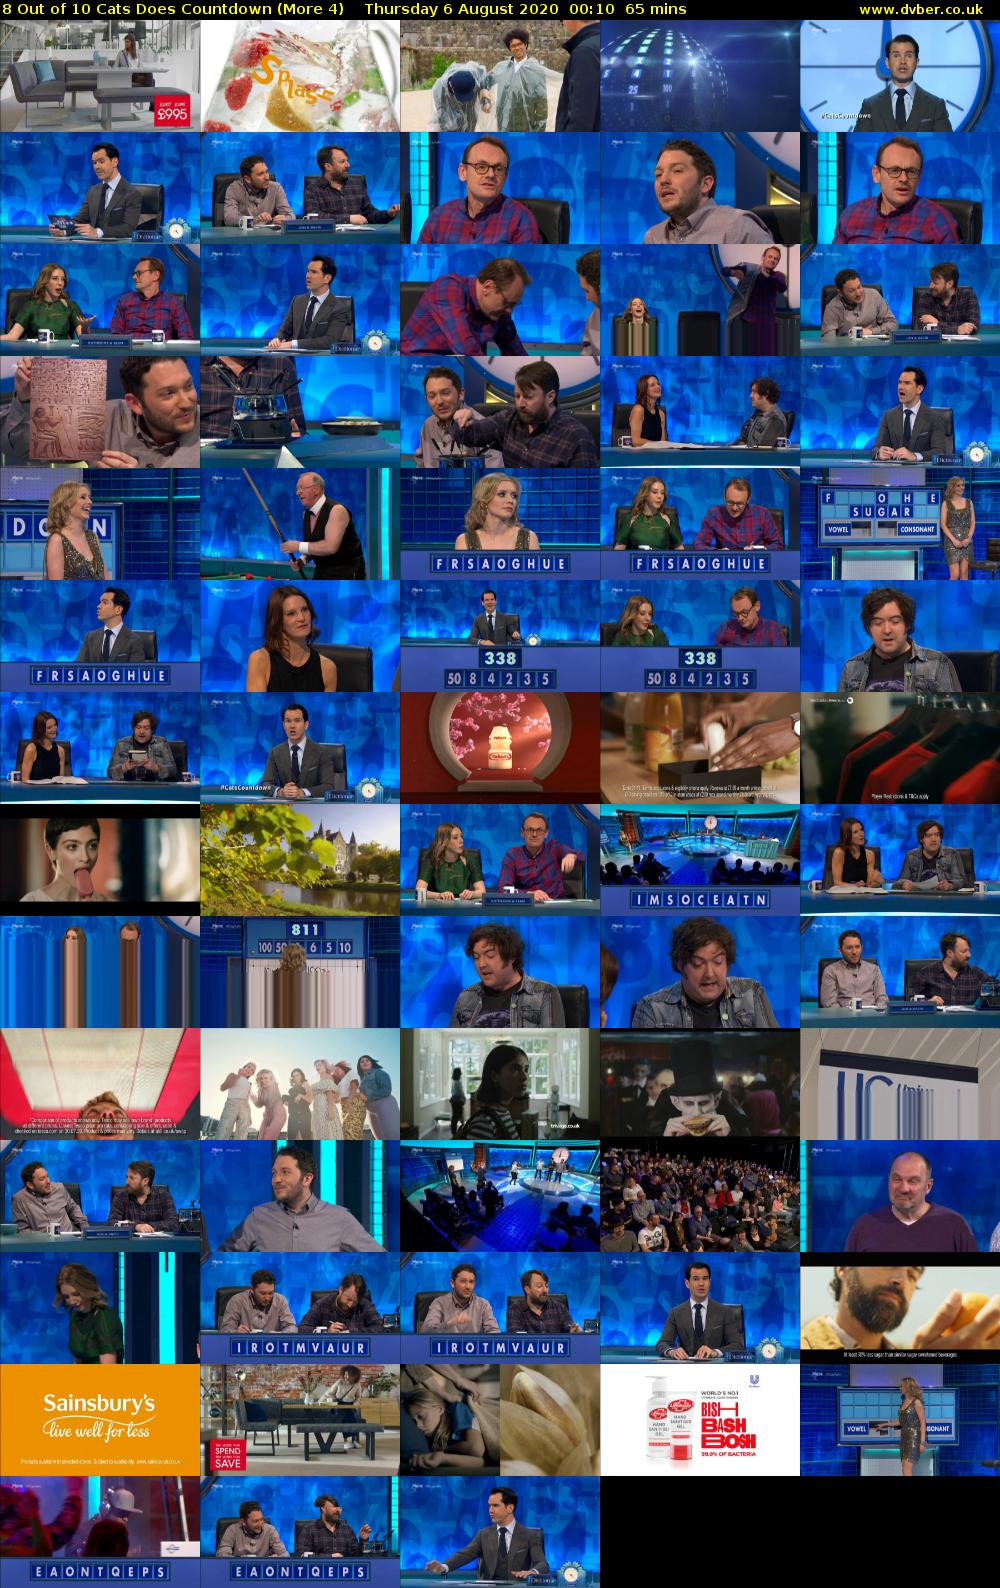 8 Out of 10 Cats Does Countdown (More 4) Thursday 6 August 2020 00:10 - 01:15